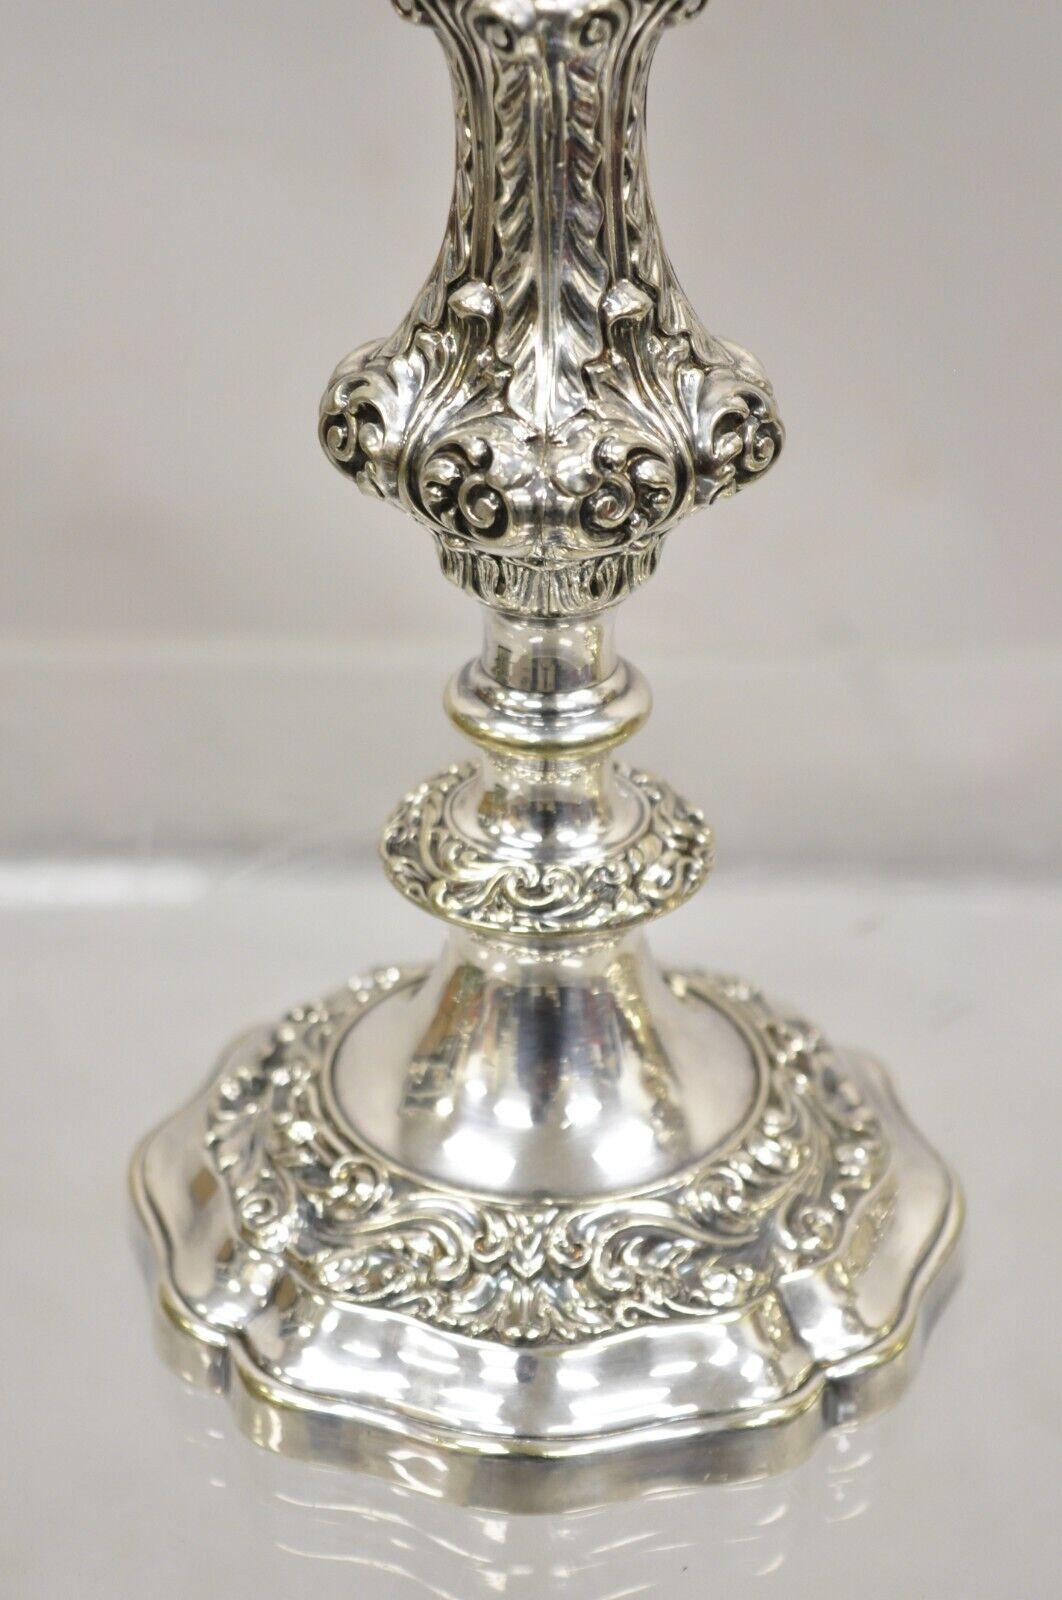 20th Century Vintage Gorham Baroque Repousse Silver Plated Single Candle Candlesticks a Pair For Sale